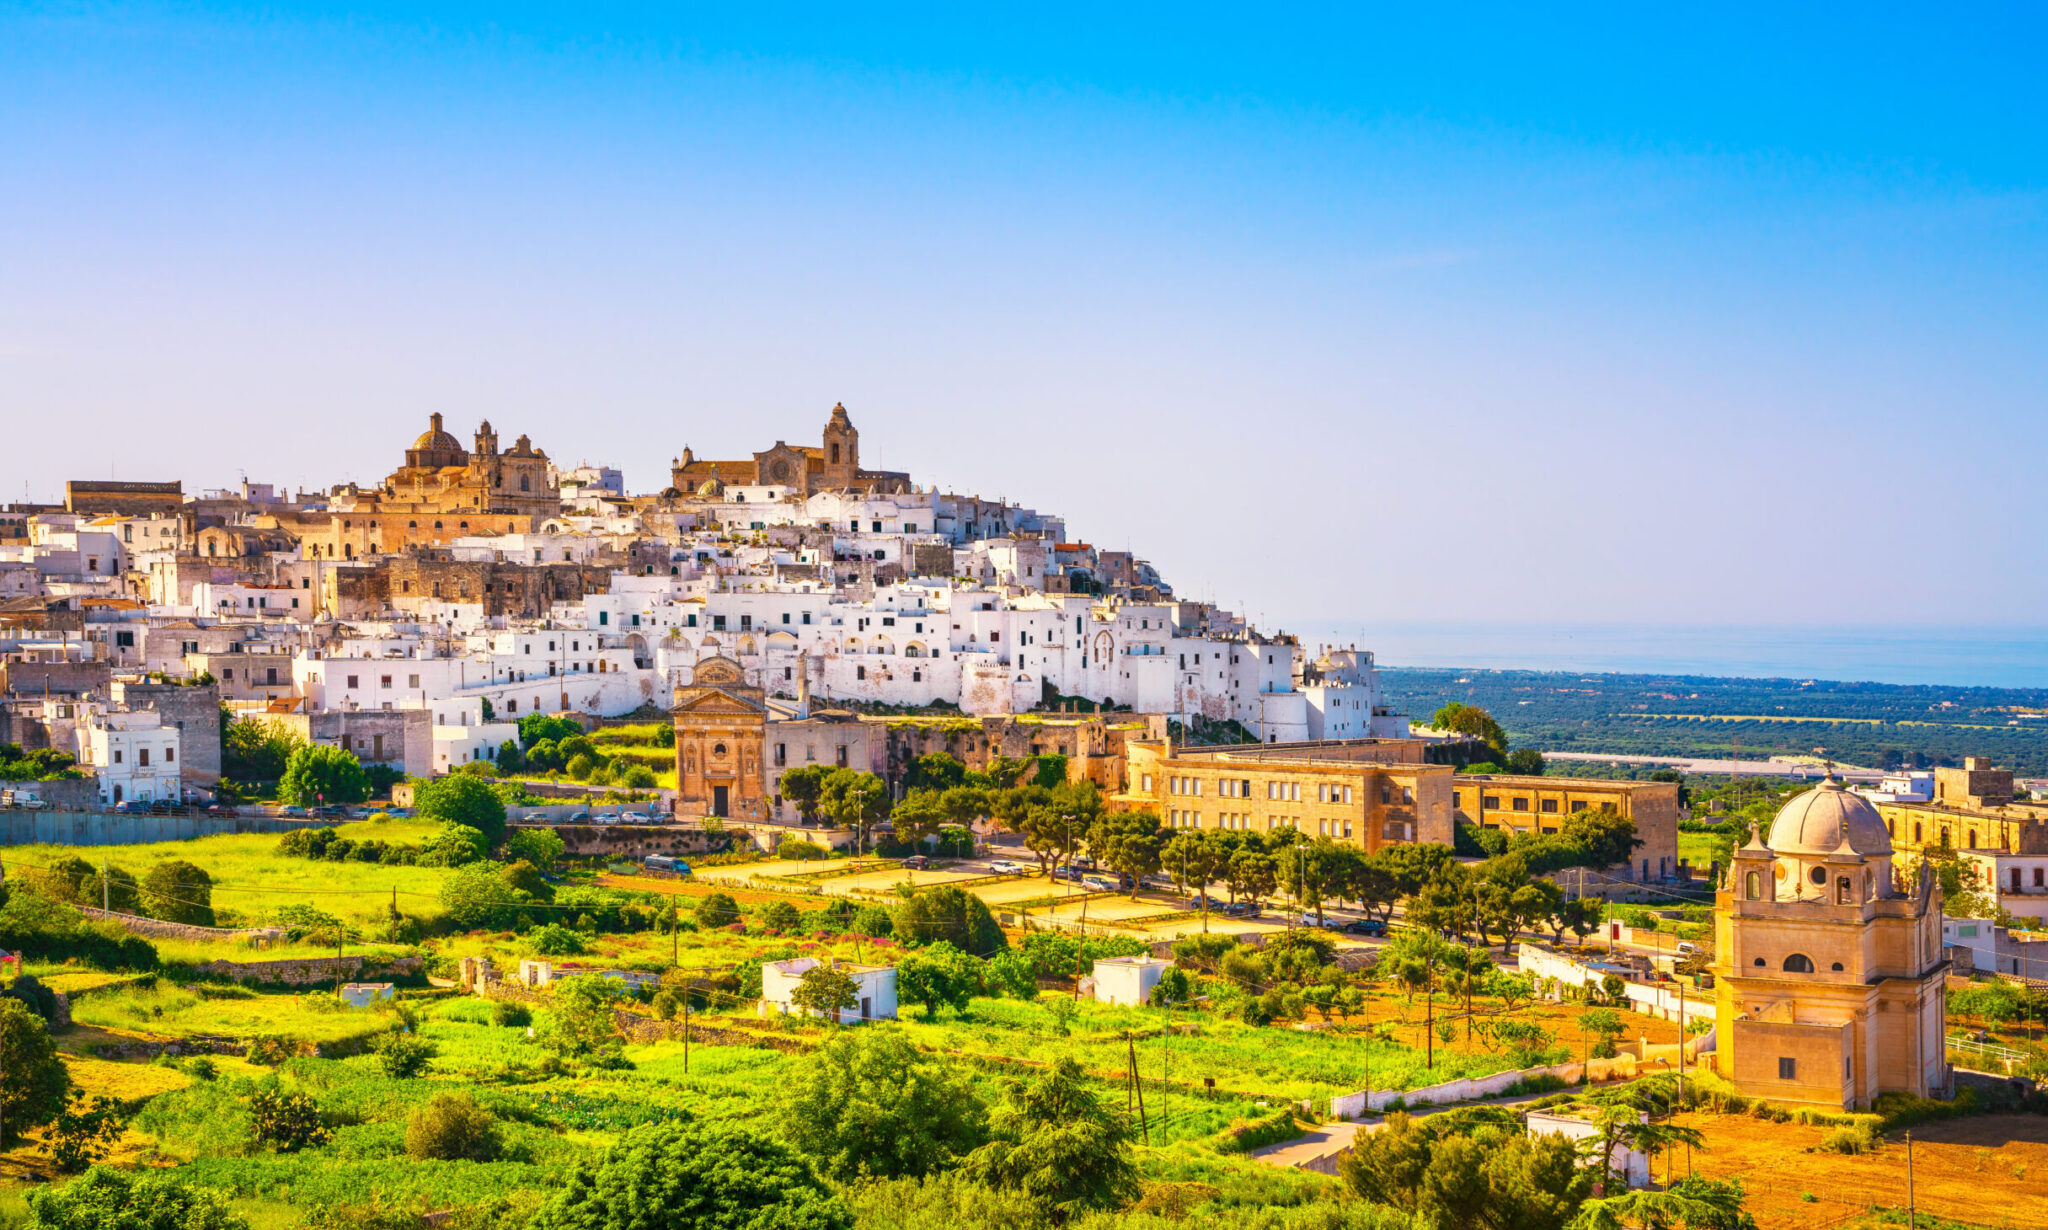 Skyline of Ostuni the so called white town in Brindisi